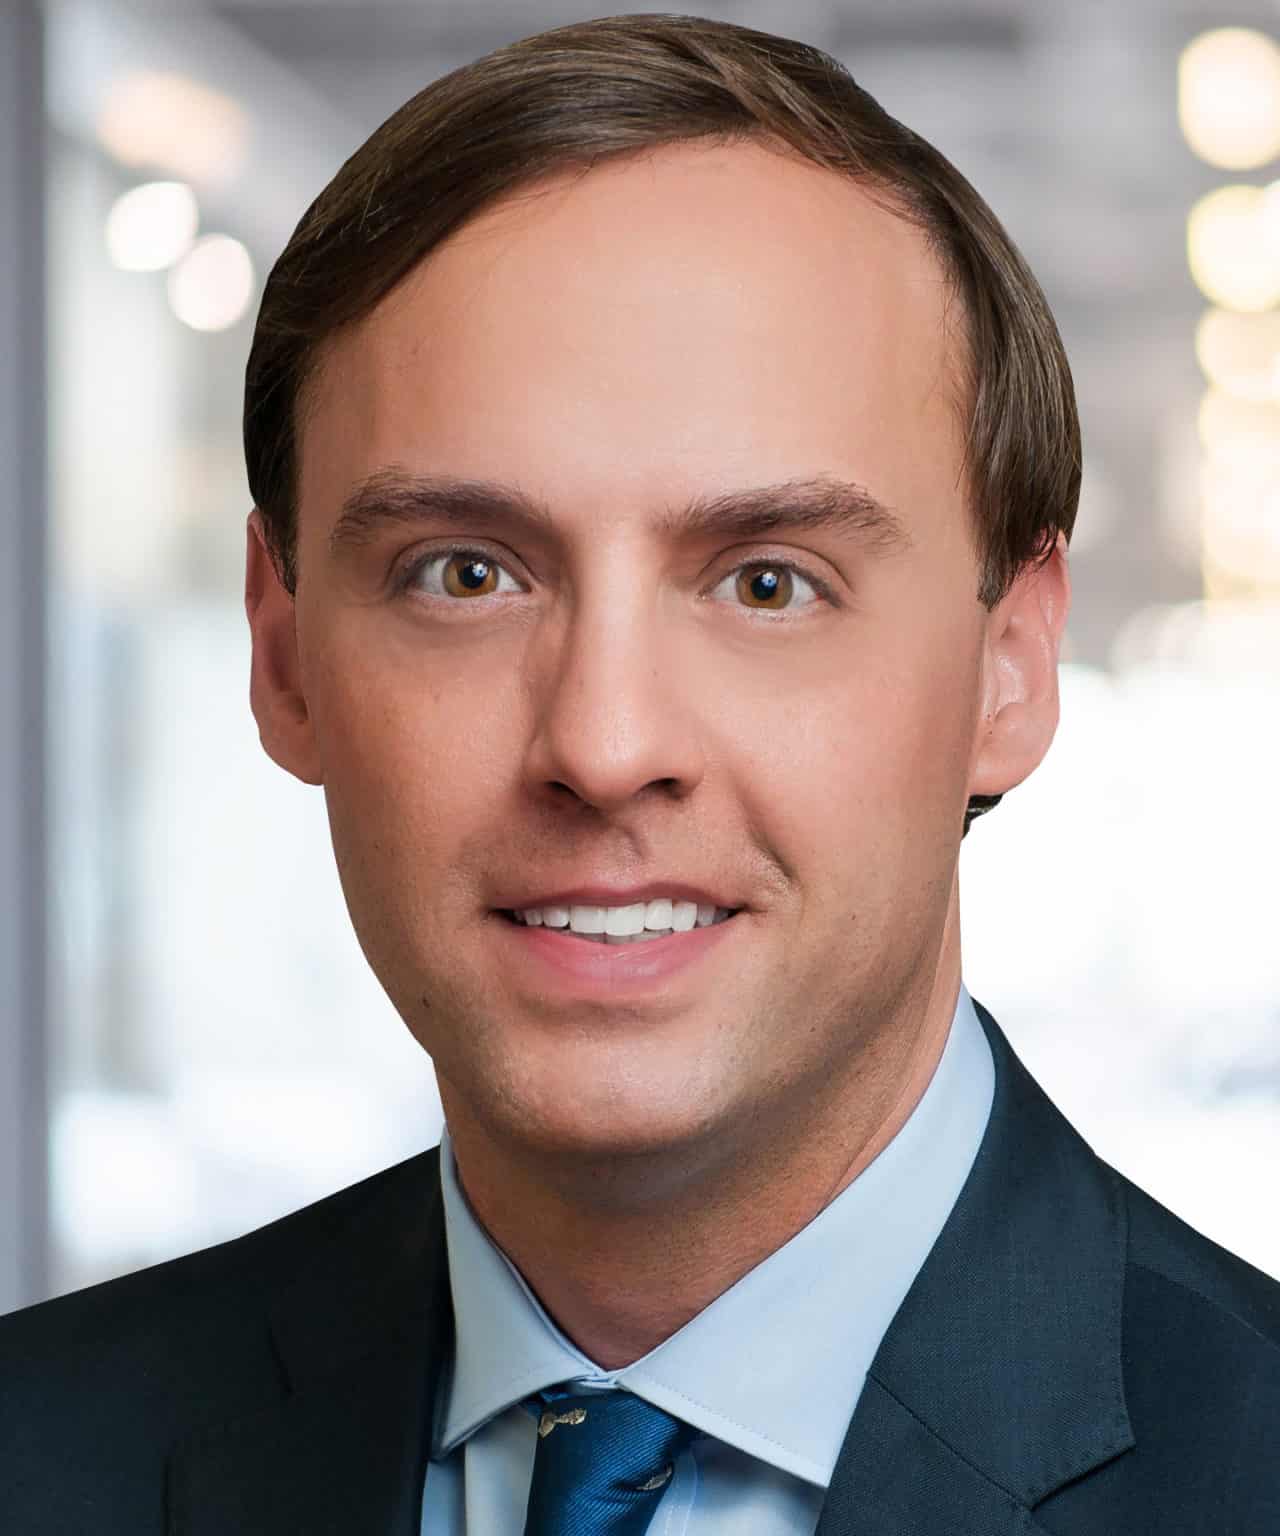 Jeff M. Martin, partner and Attorney at Grimes Teich Anderson